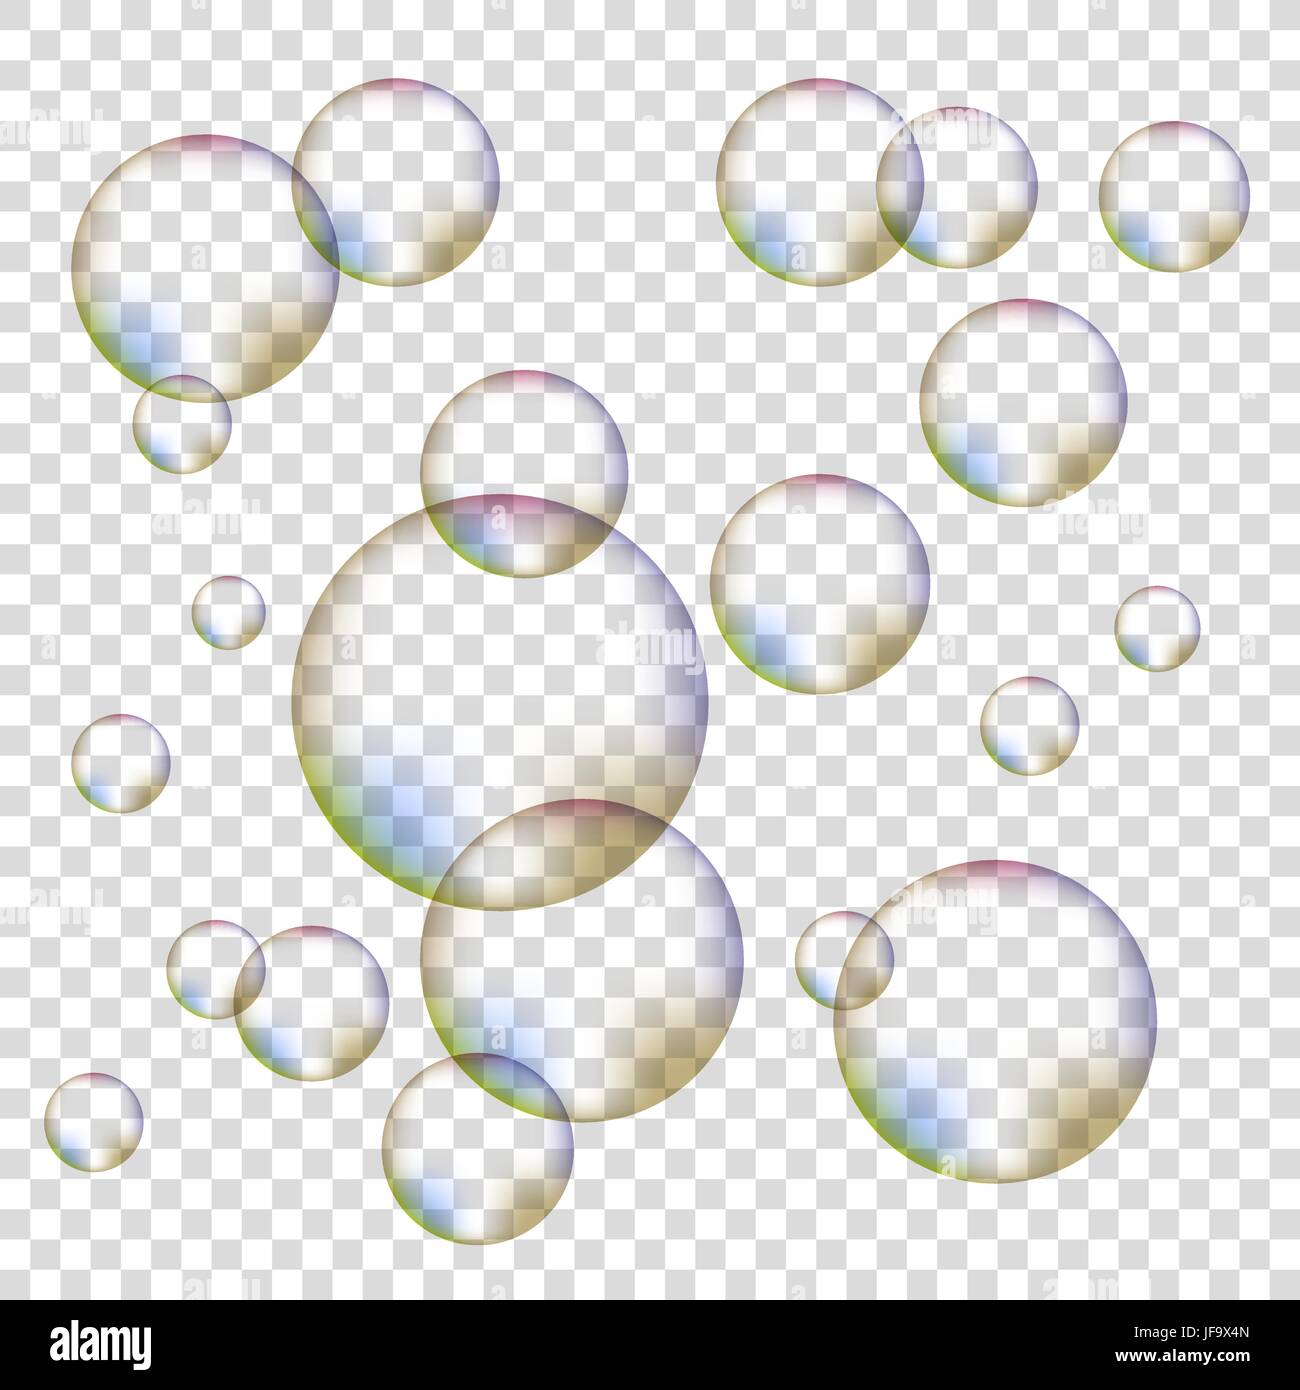 Set of Colorful Transparent Foam Bubbles Isolated on Checkered Background Stock Vector